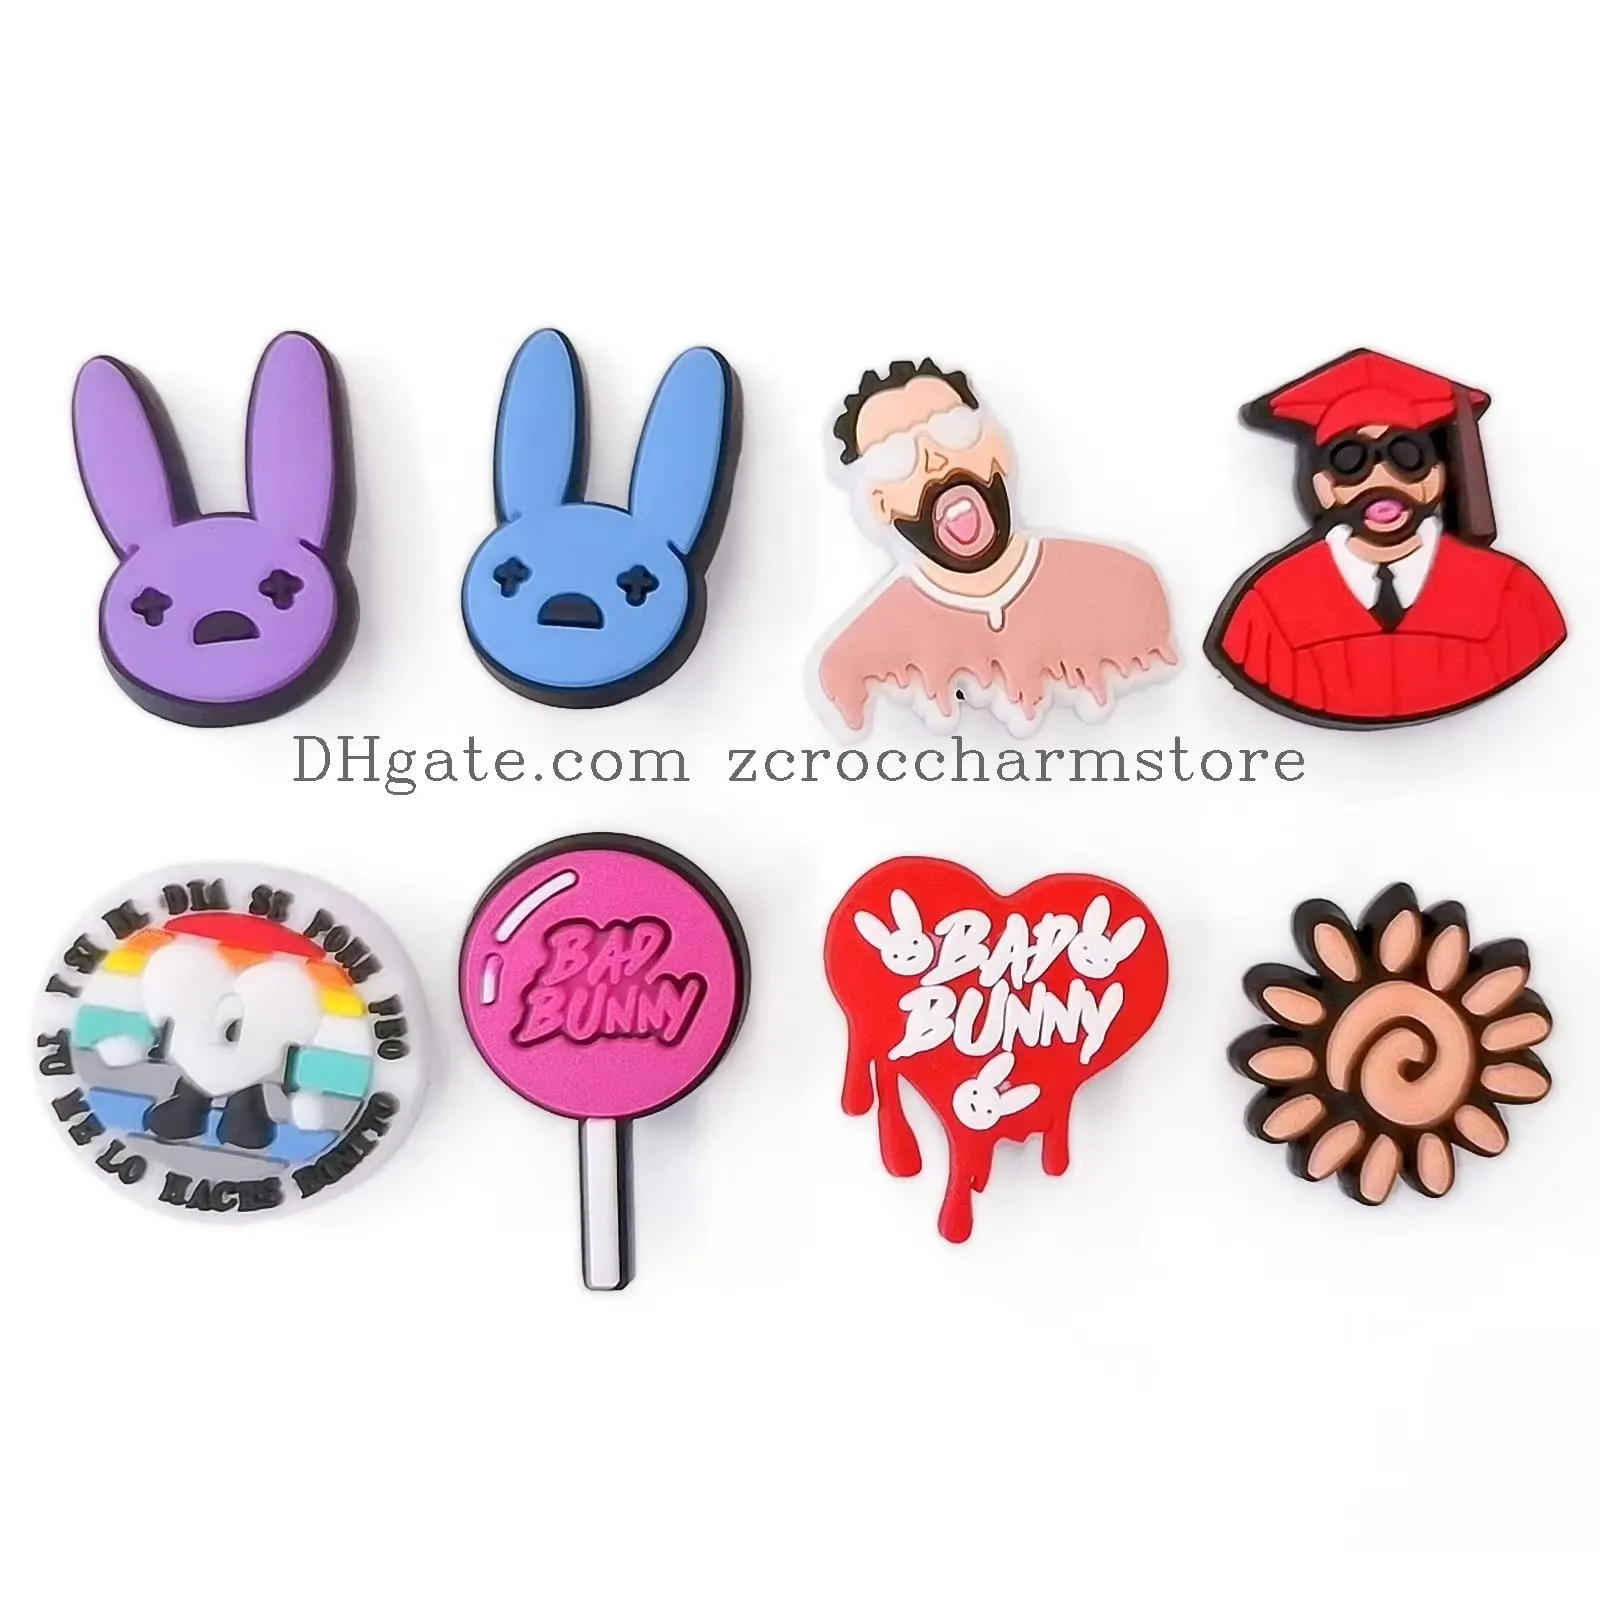 shoe cute charms shoes decoration bunny trendy with buttons for decoration party gifts women and women kids boys girls favor